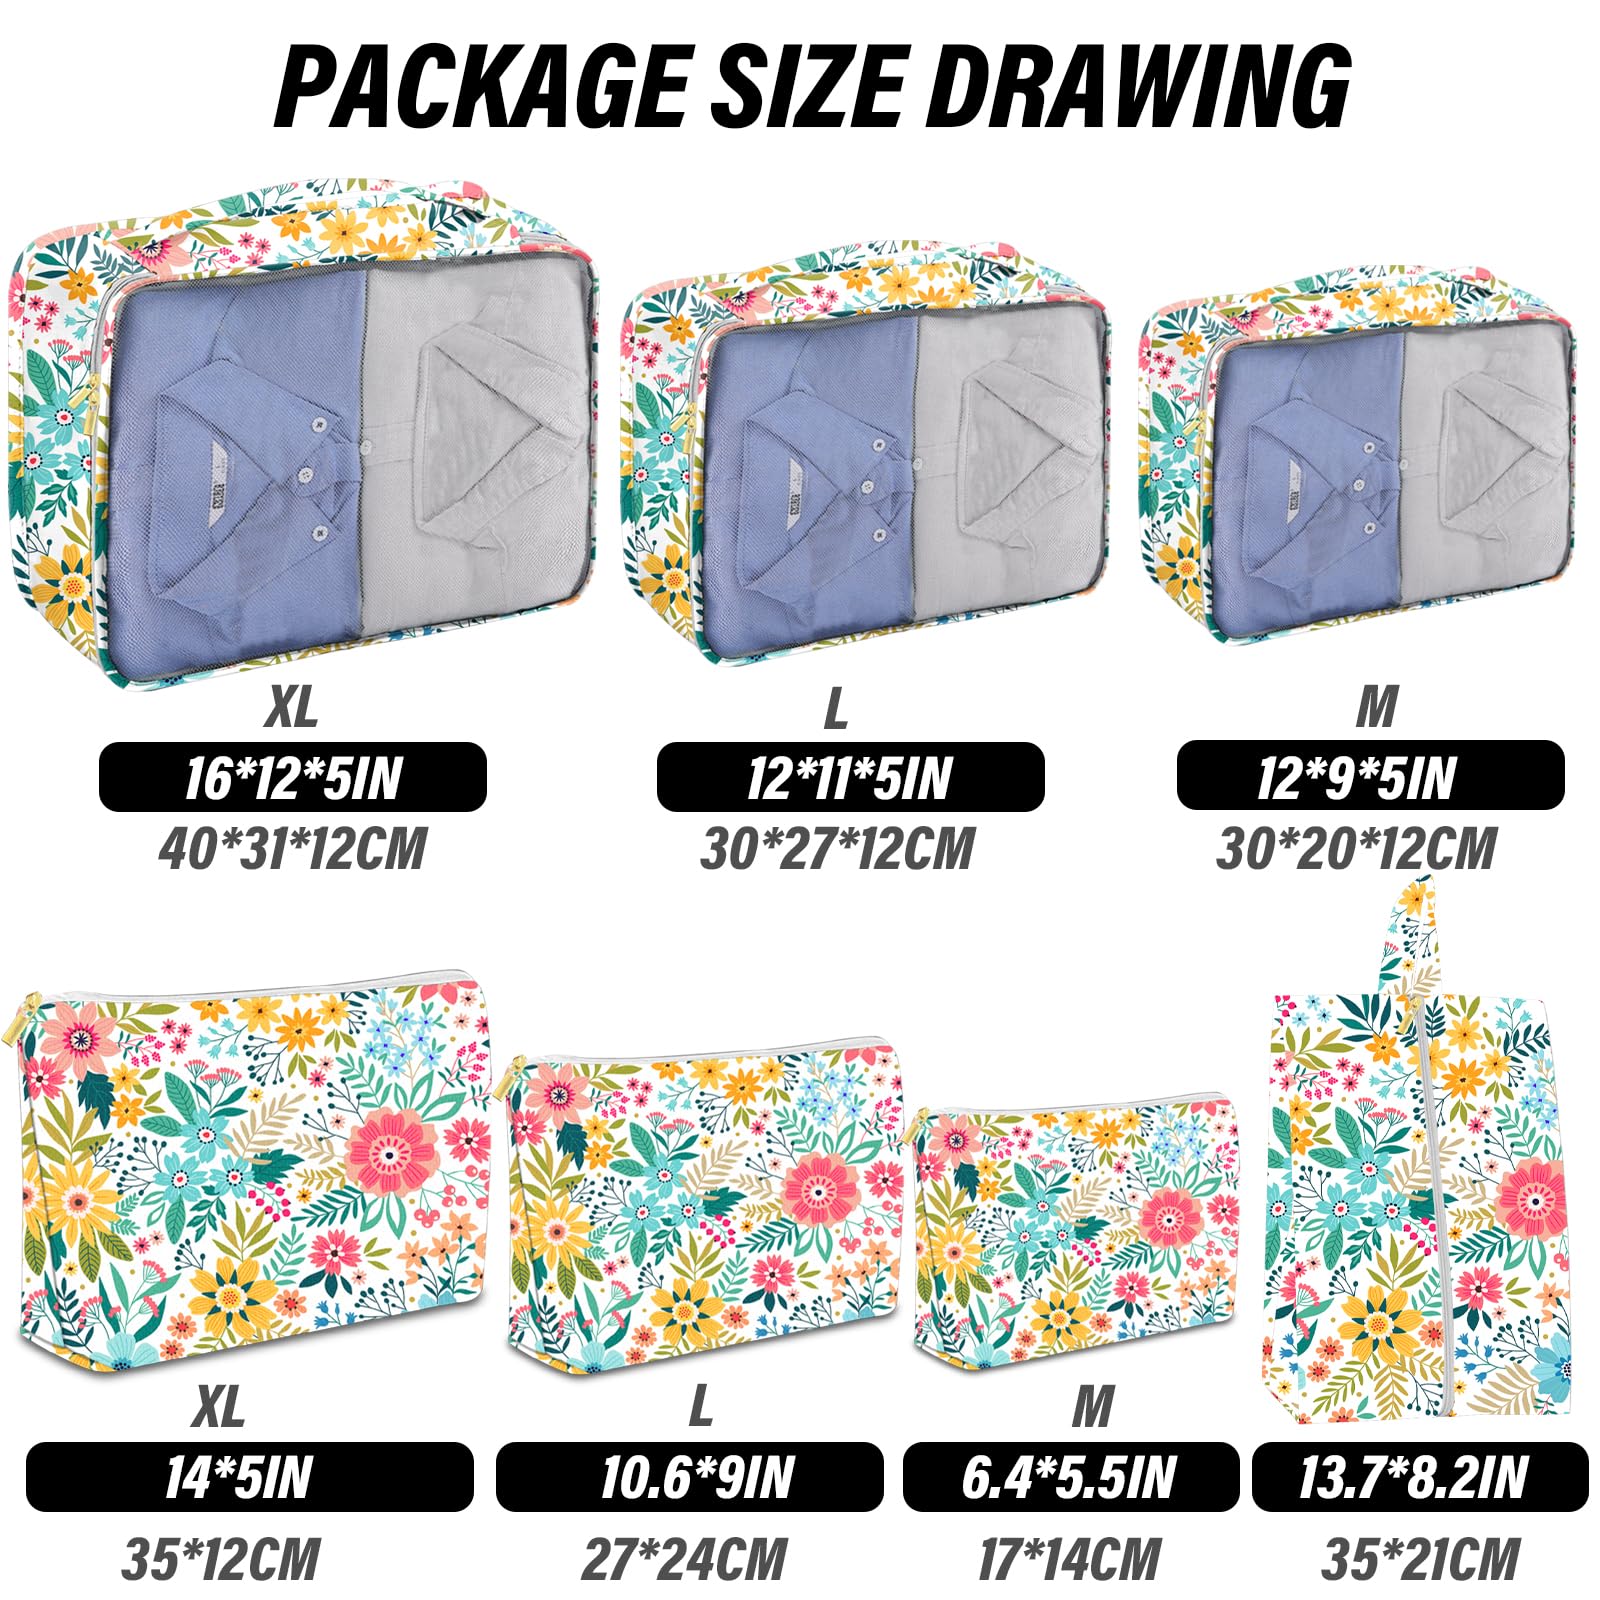 7-Piece Floral Travel Packing Cubes Product Details